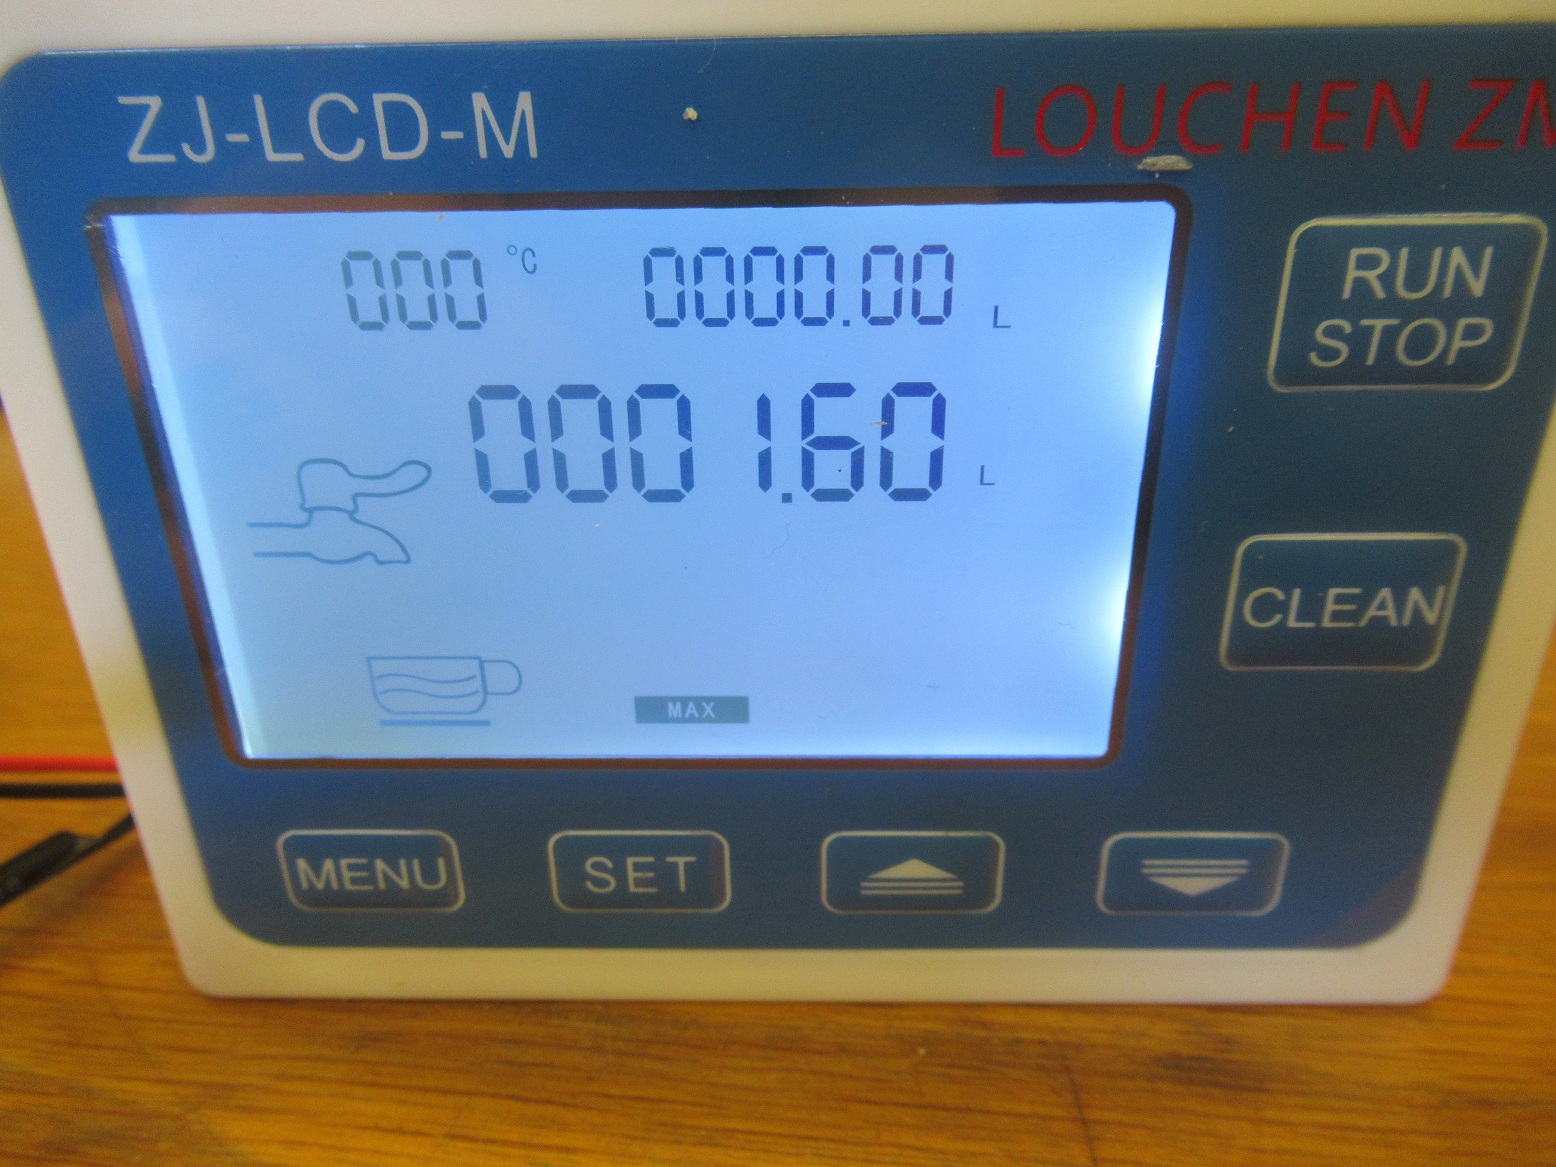 ZJ-LCD-M Flow control meter display review and instruction manual